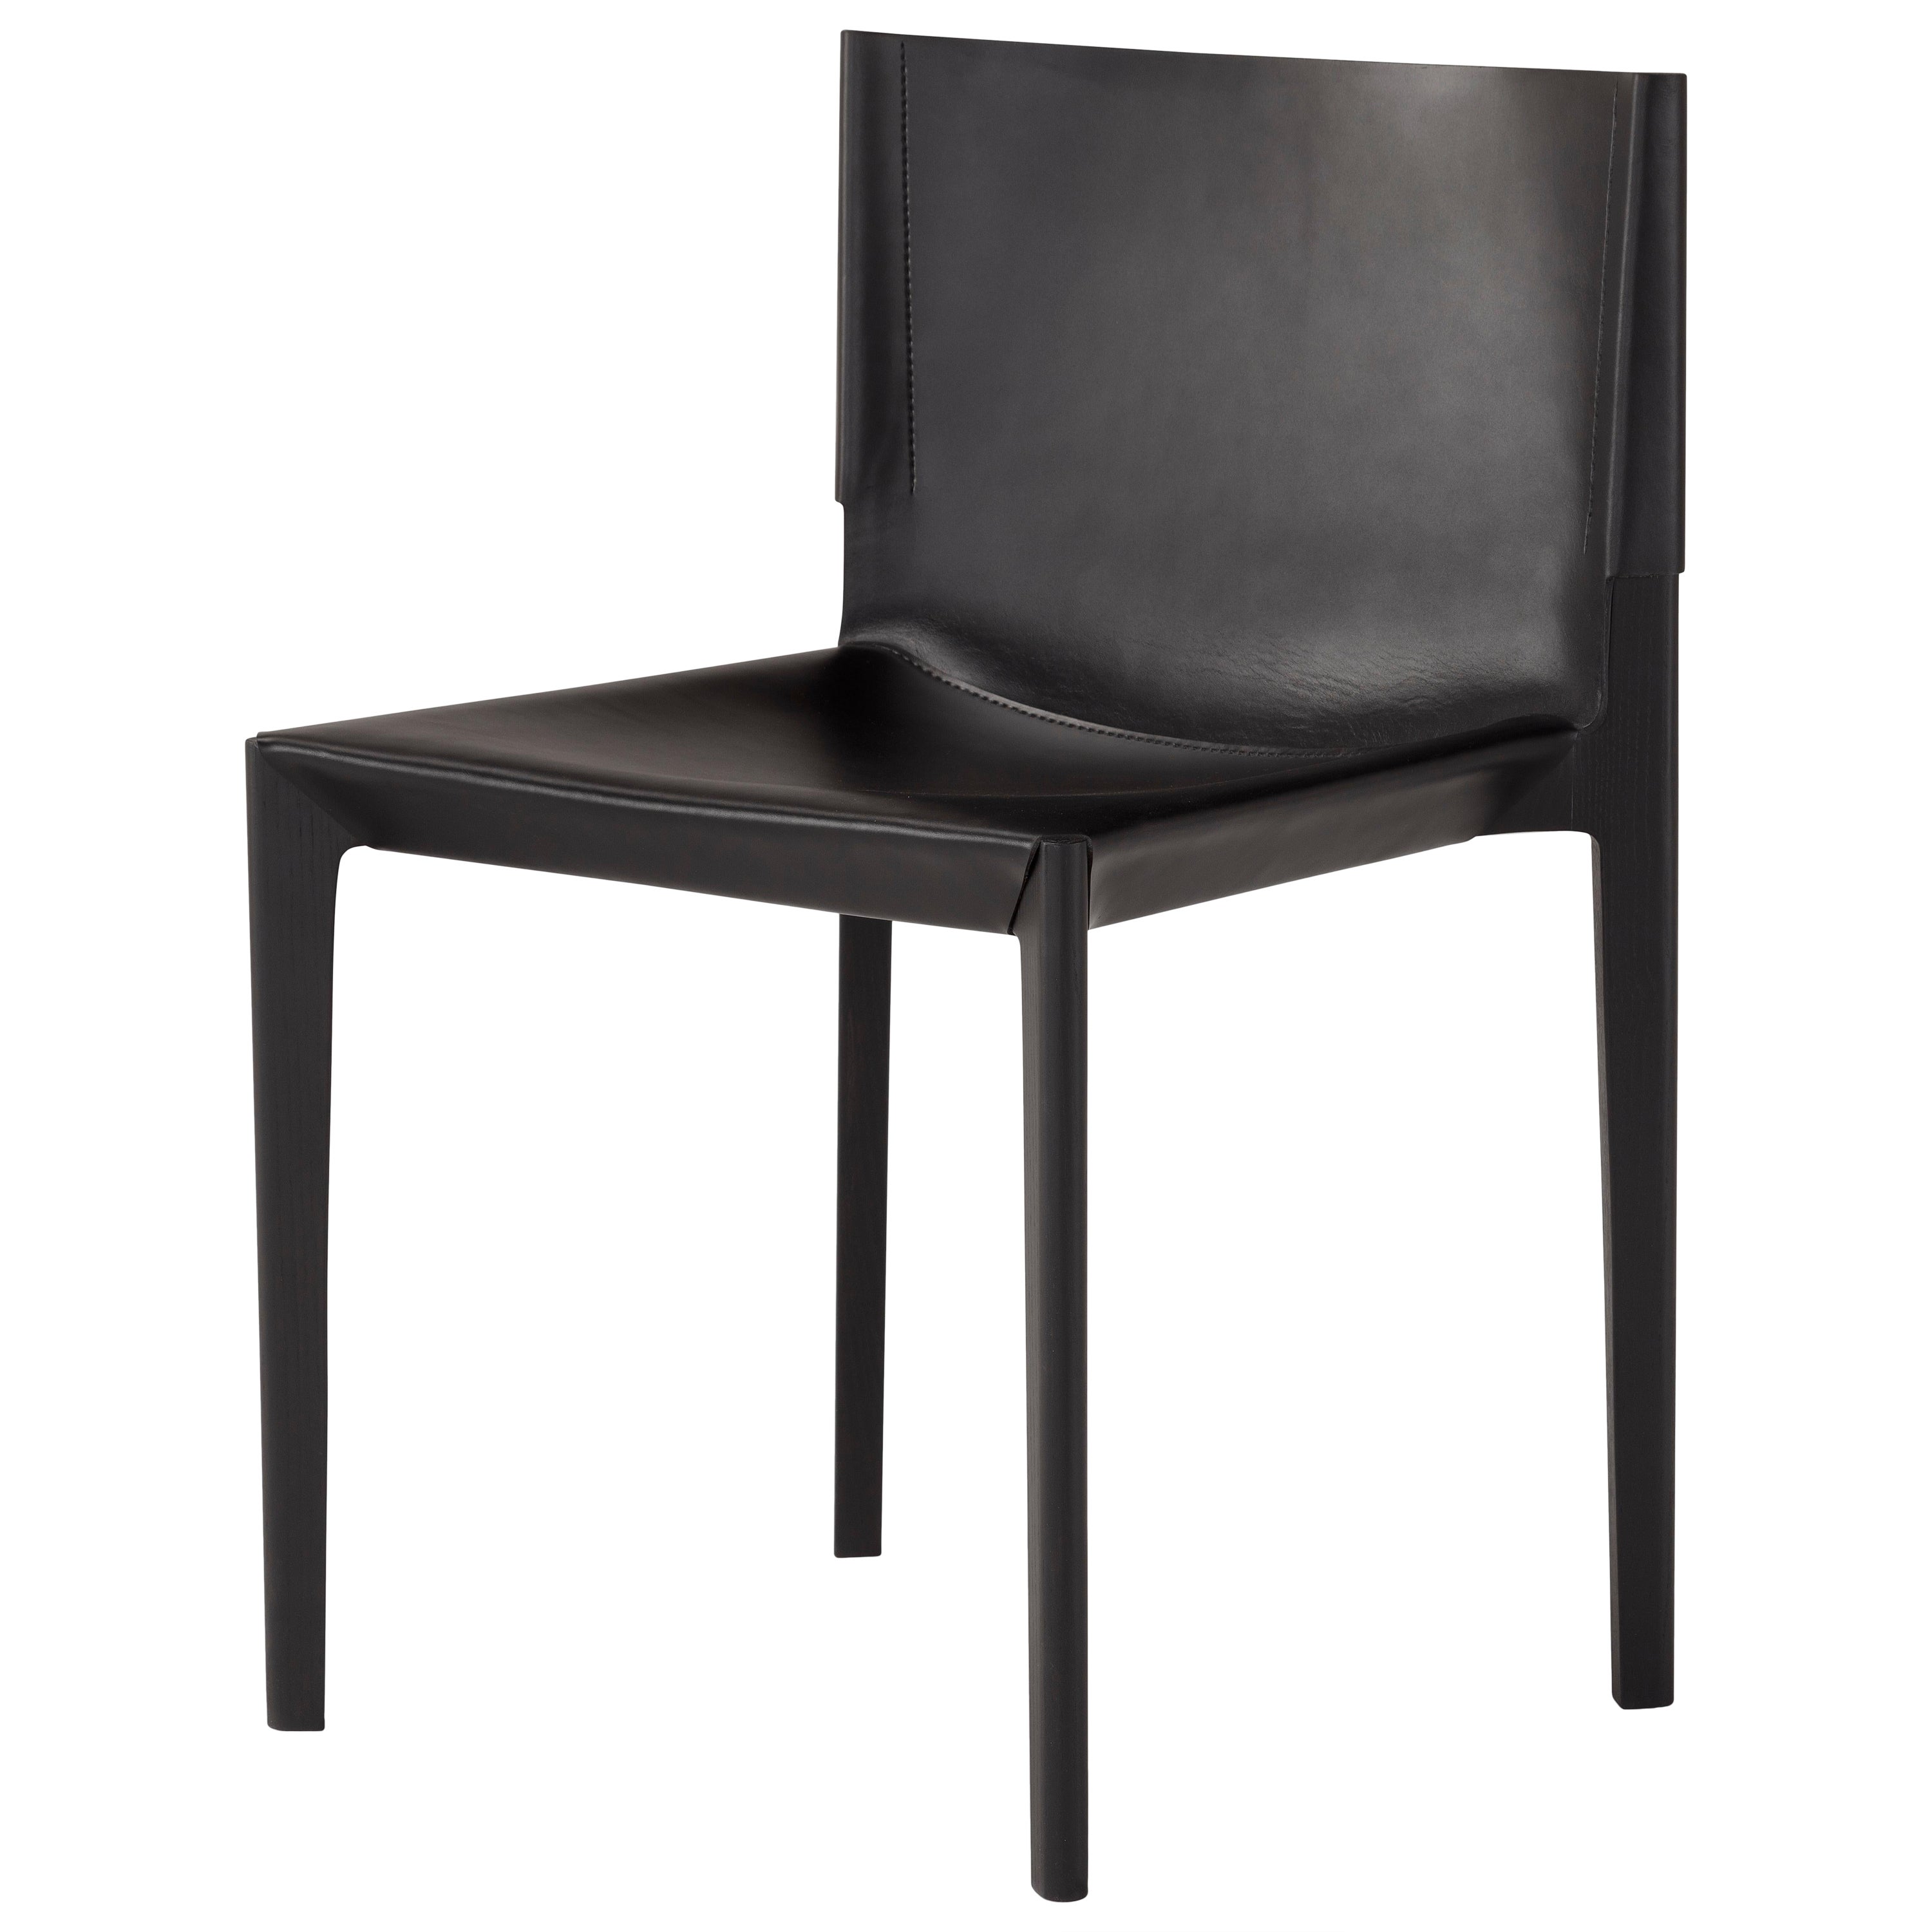 Contemporary Wooden Black Chair 'Stilt', Cuoio Leather For Sale